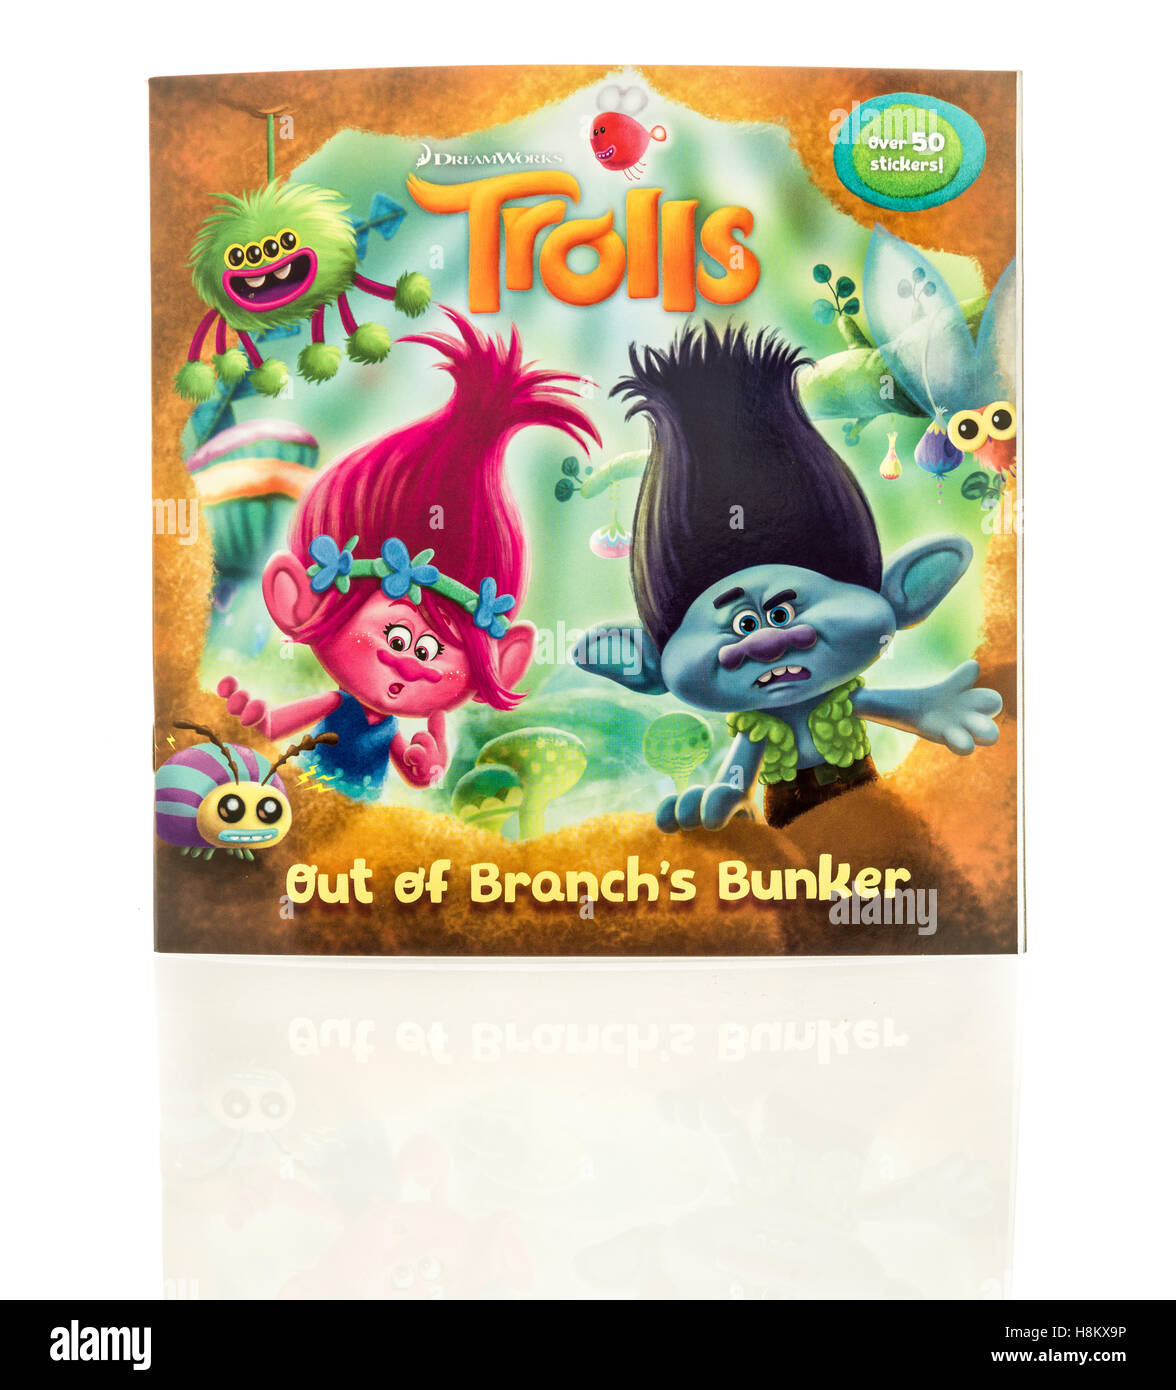 Winneconne, WI - 13 November 2016: Trolls book for kids on an isolated background. Stock Photo